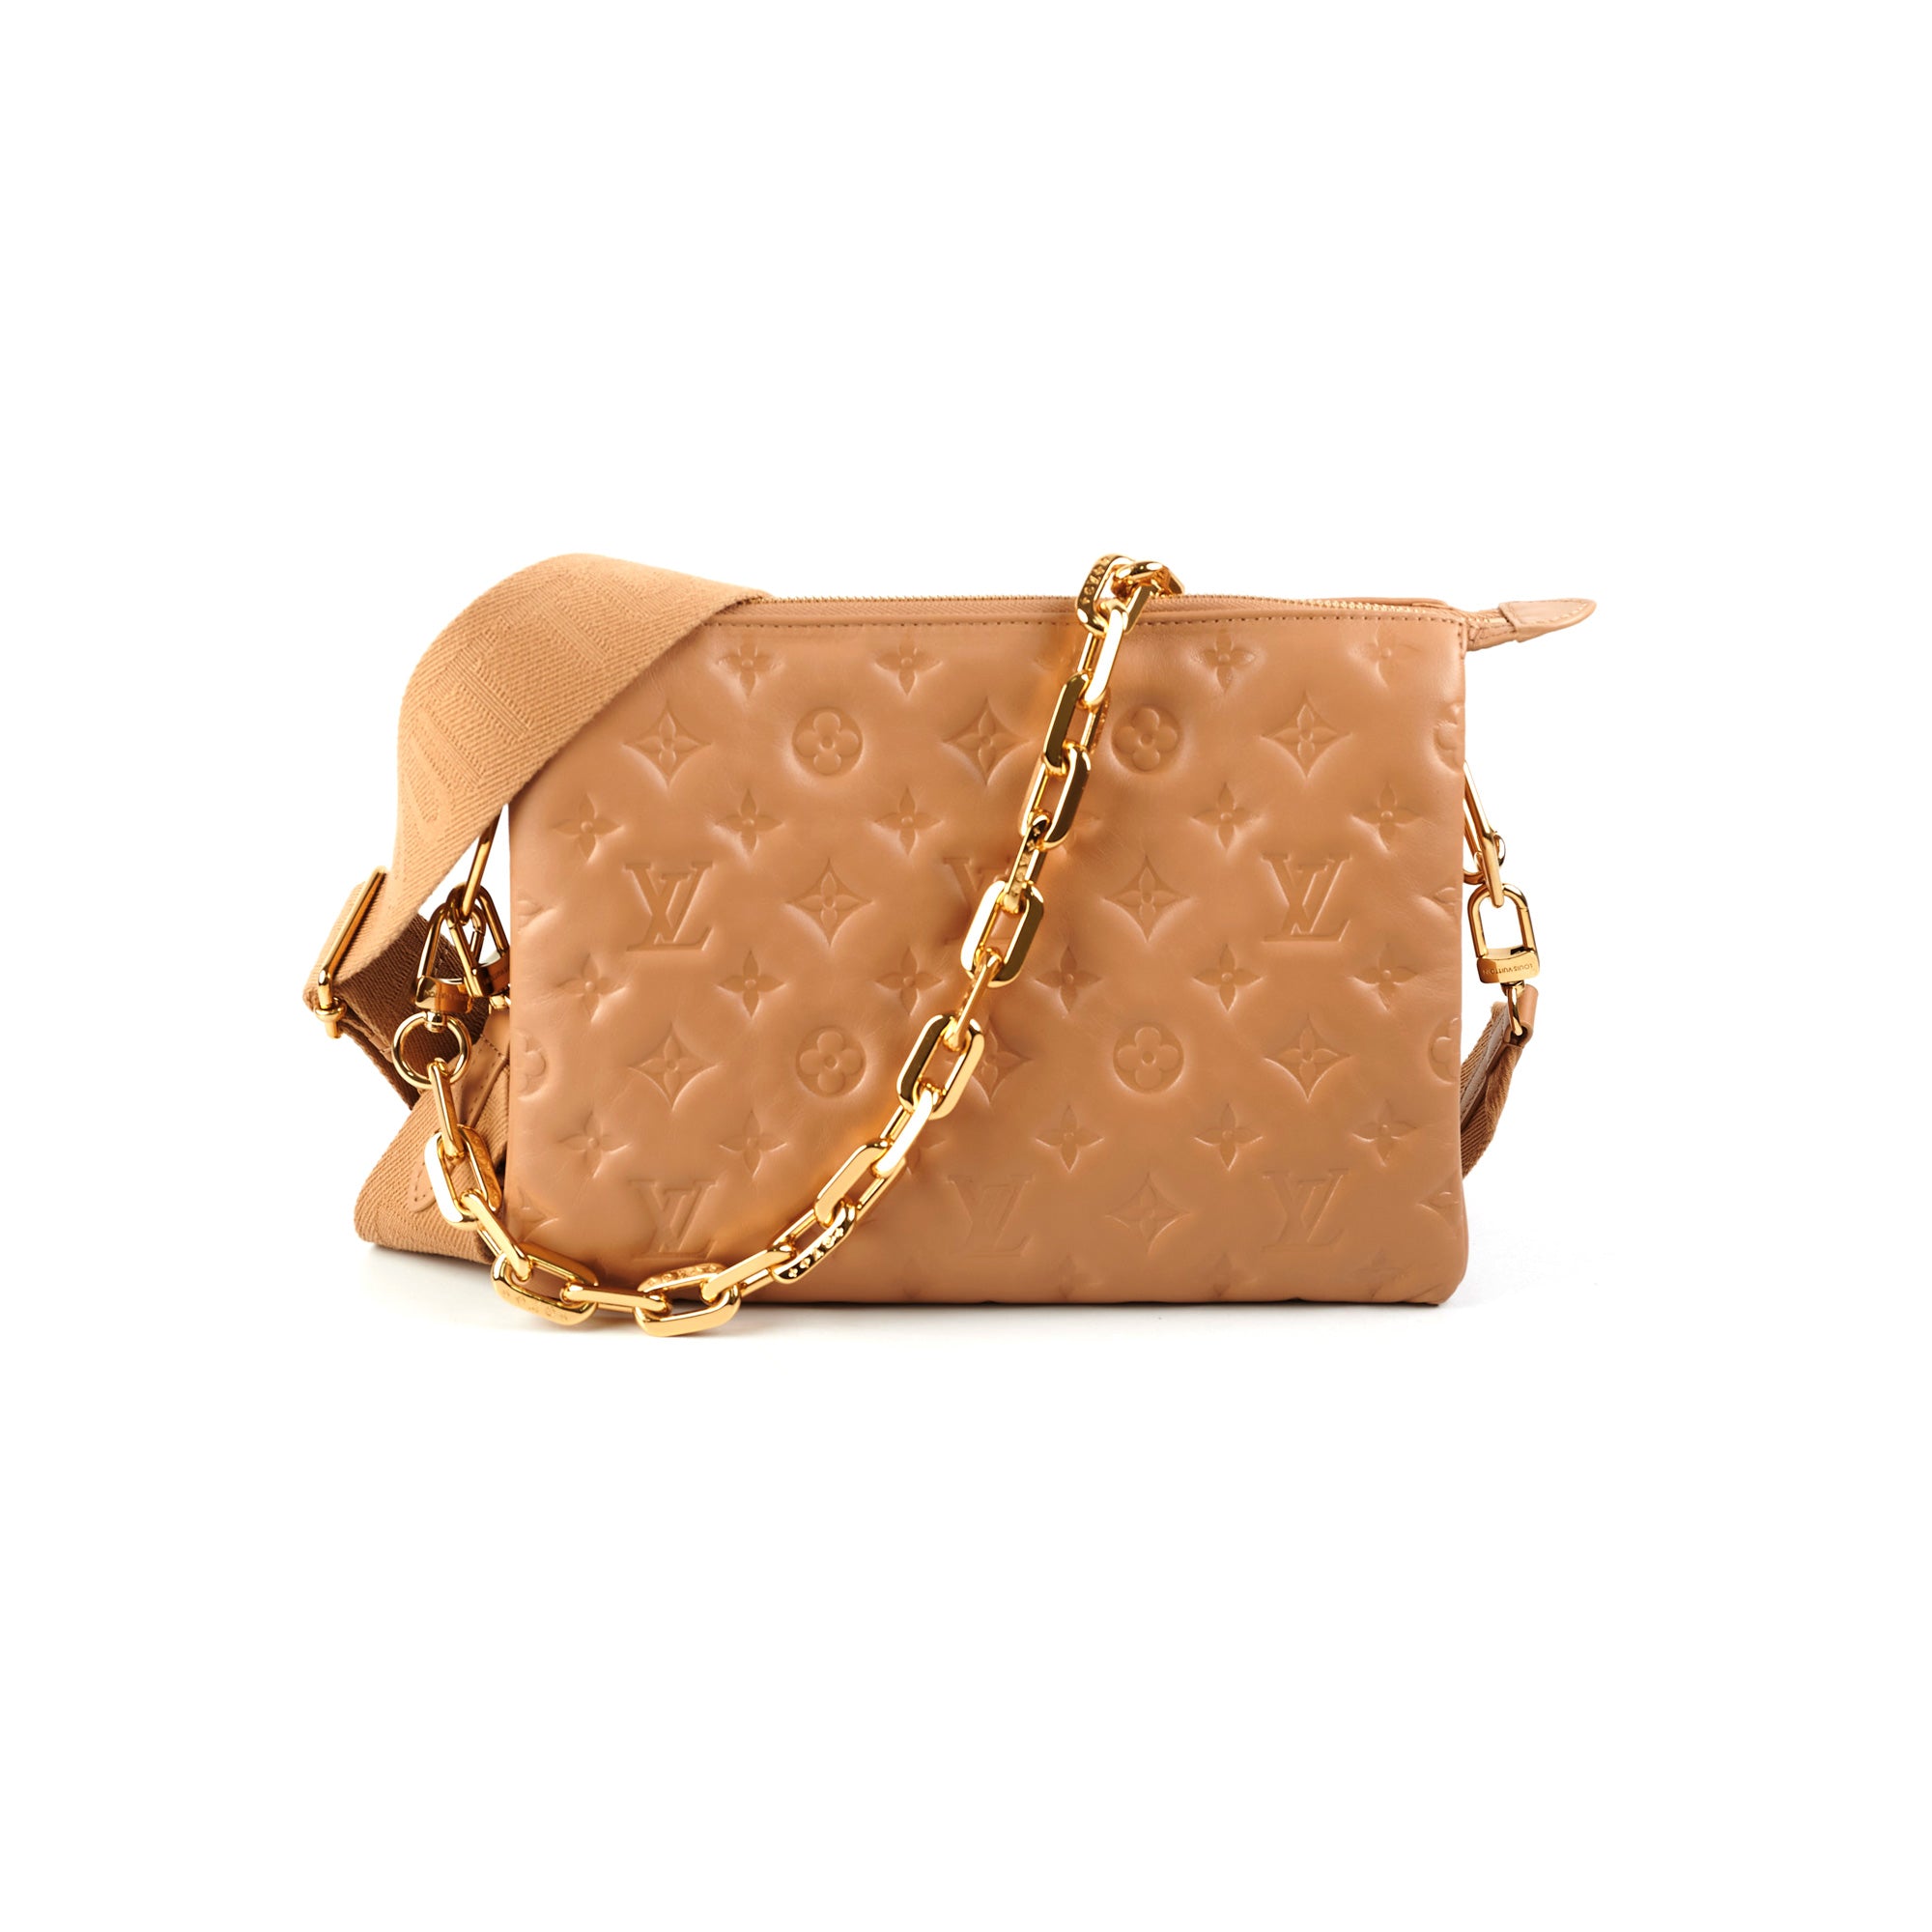 Coussin leather handbag Louis Vuitton Camel in Leather - 37569697